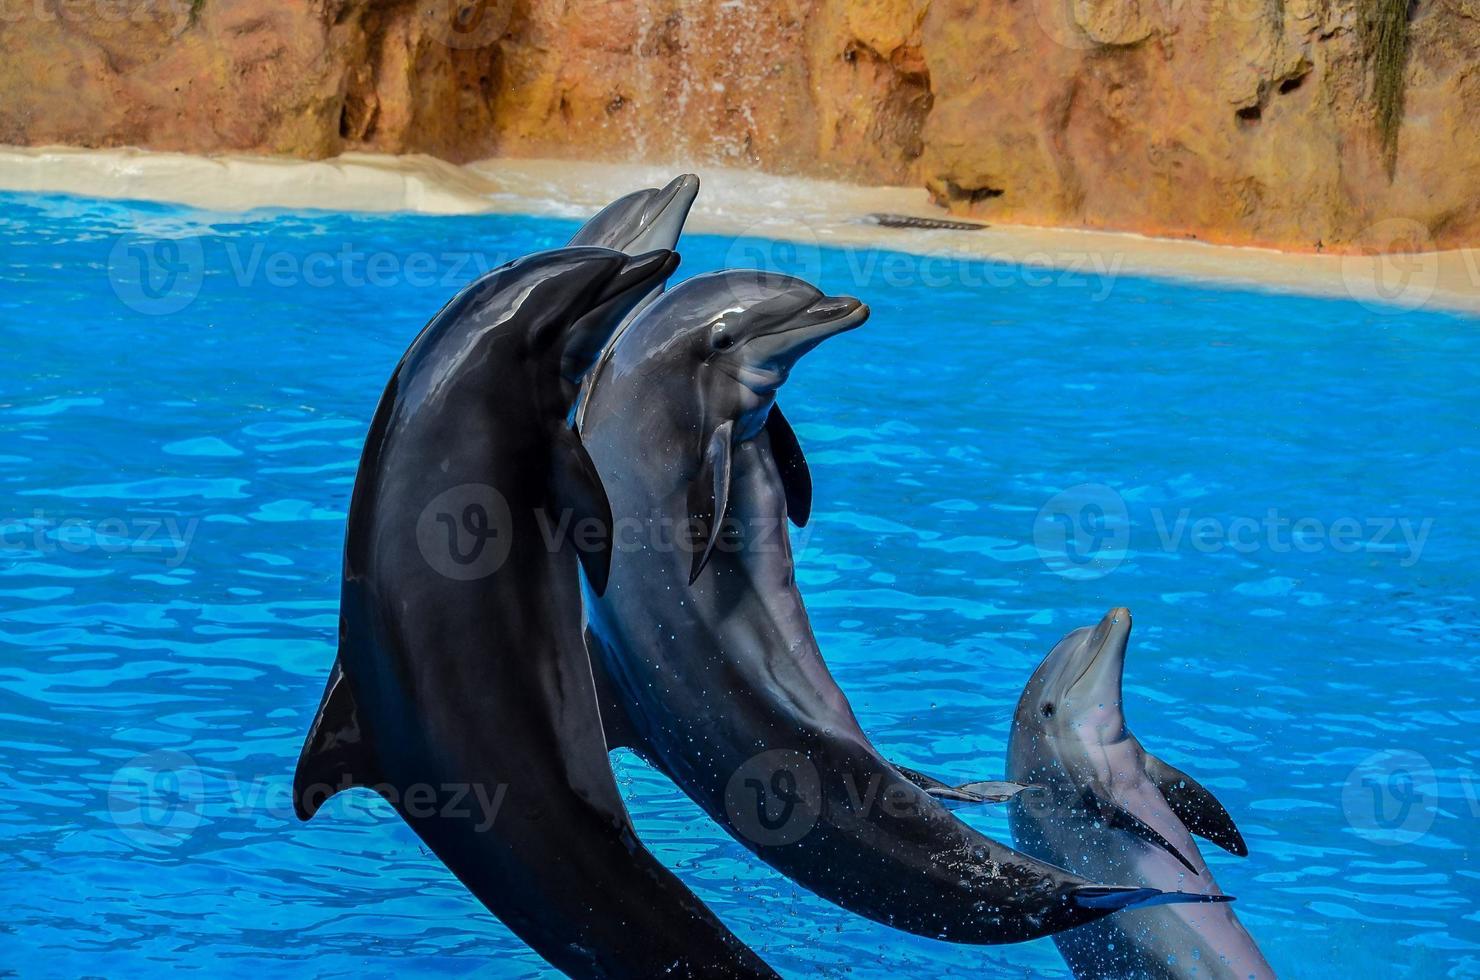 Dolphins in the zoo photo